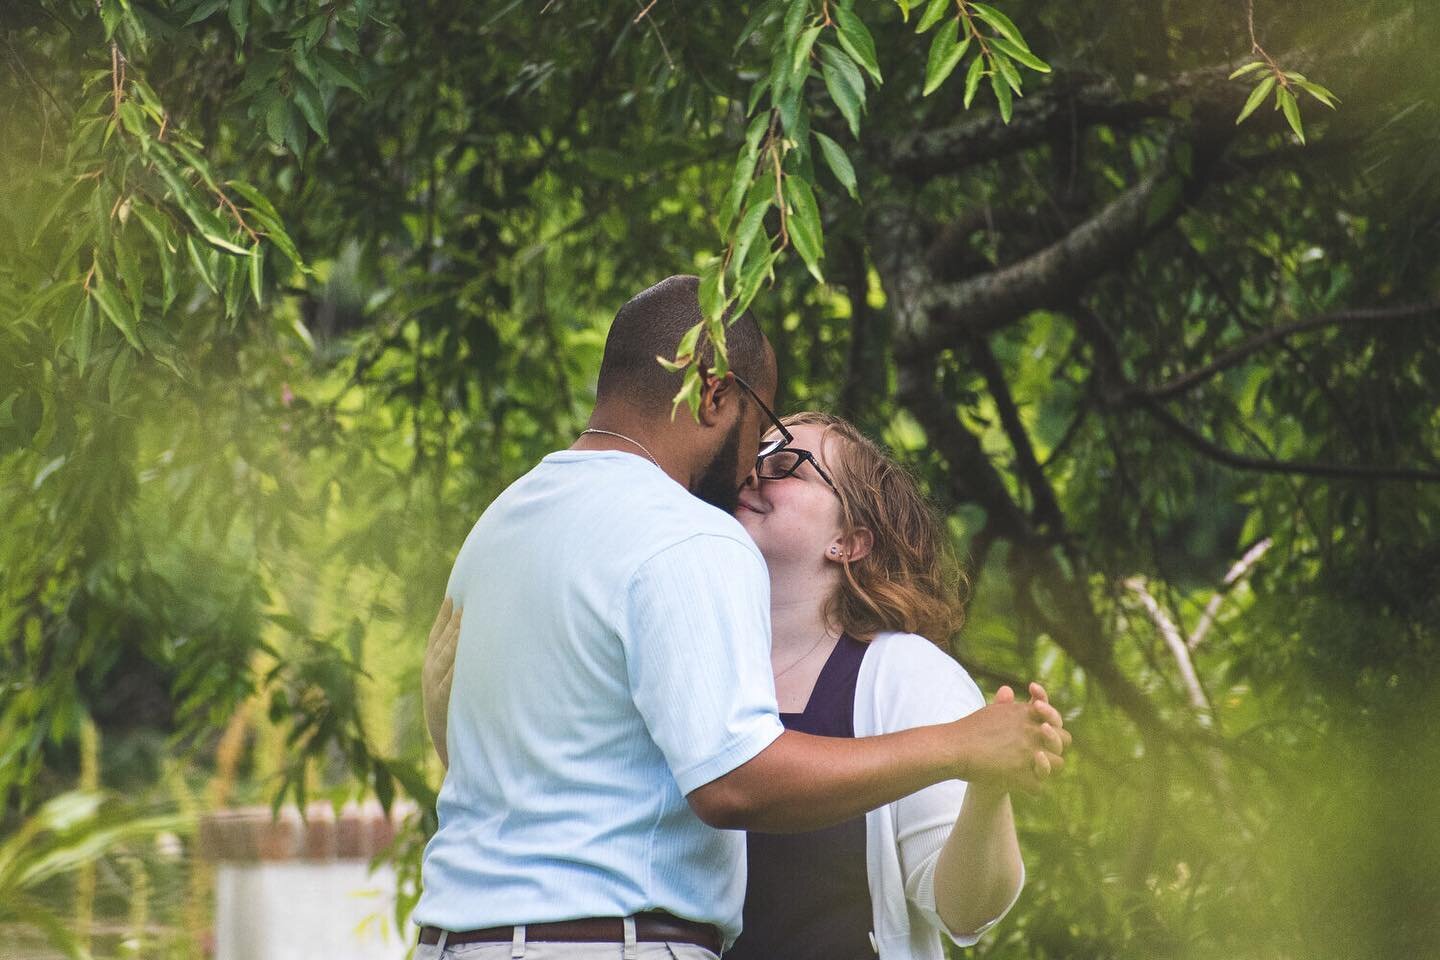 Hazy Lazy Late Summer Romance.
Wedding packages come with an engagement session!!!!
AND STILL TIME TO BOOK YOUR BIG DAY FOR HALF OFF!
Packages purchased for future dates at 5. 0. %. OFF.
.
Too much of a good thing can be a good thing .
#knhtphotograp